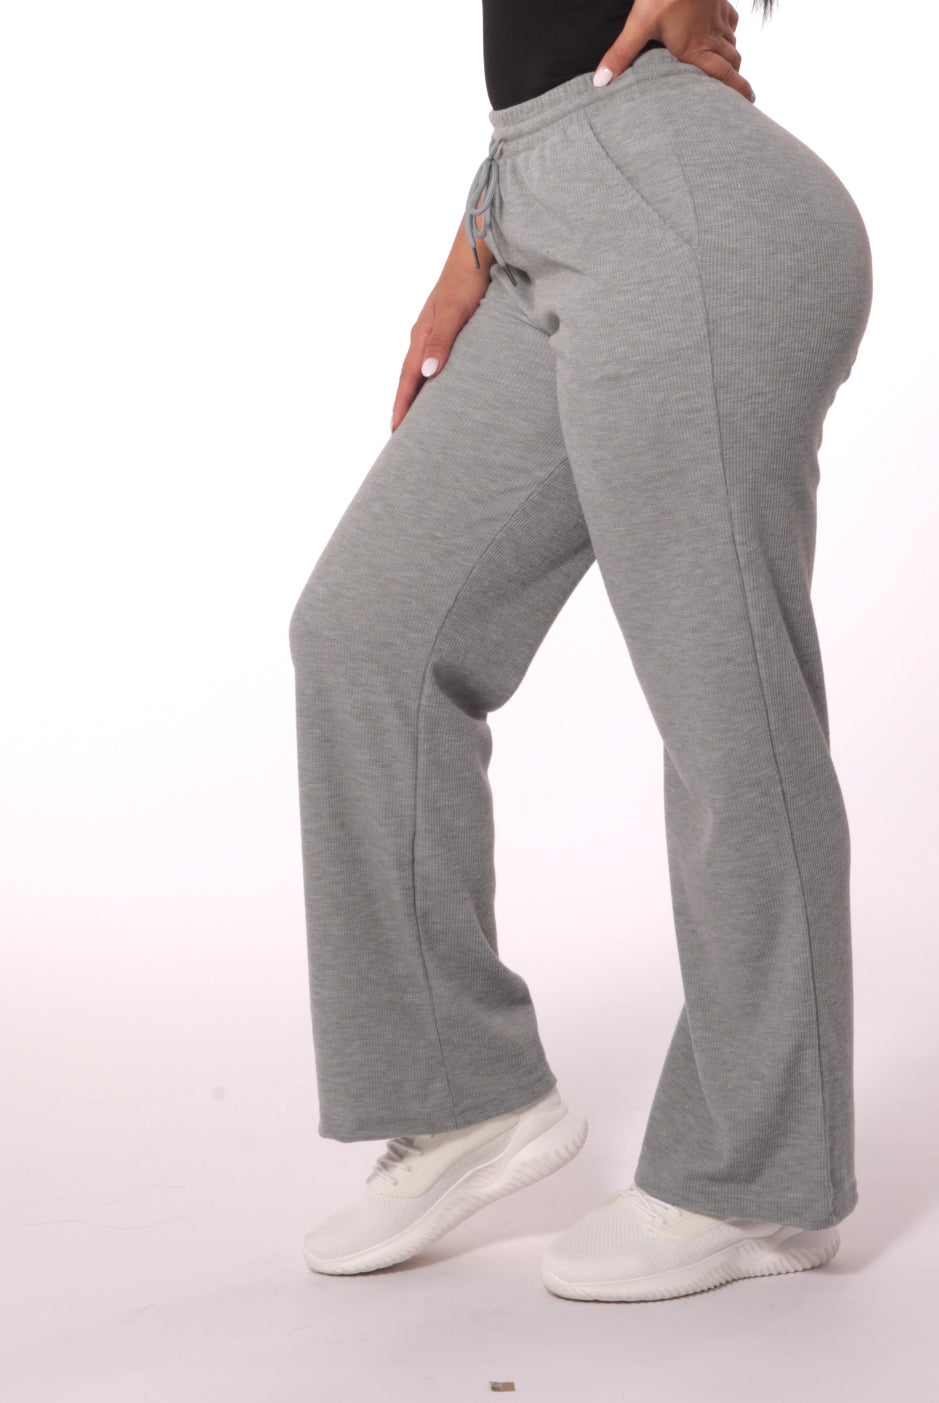 Shosho lightweight fleece lined stretchy joggers striped black white  pockets Size undefined - $18 - From Julie